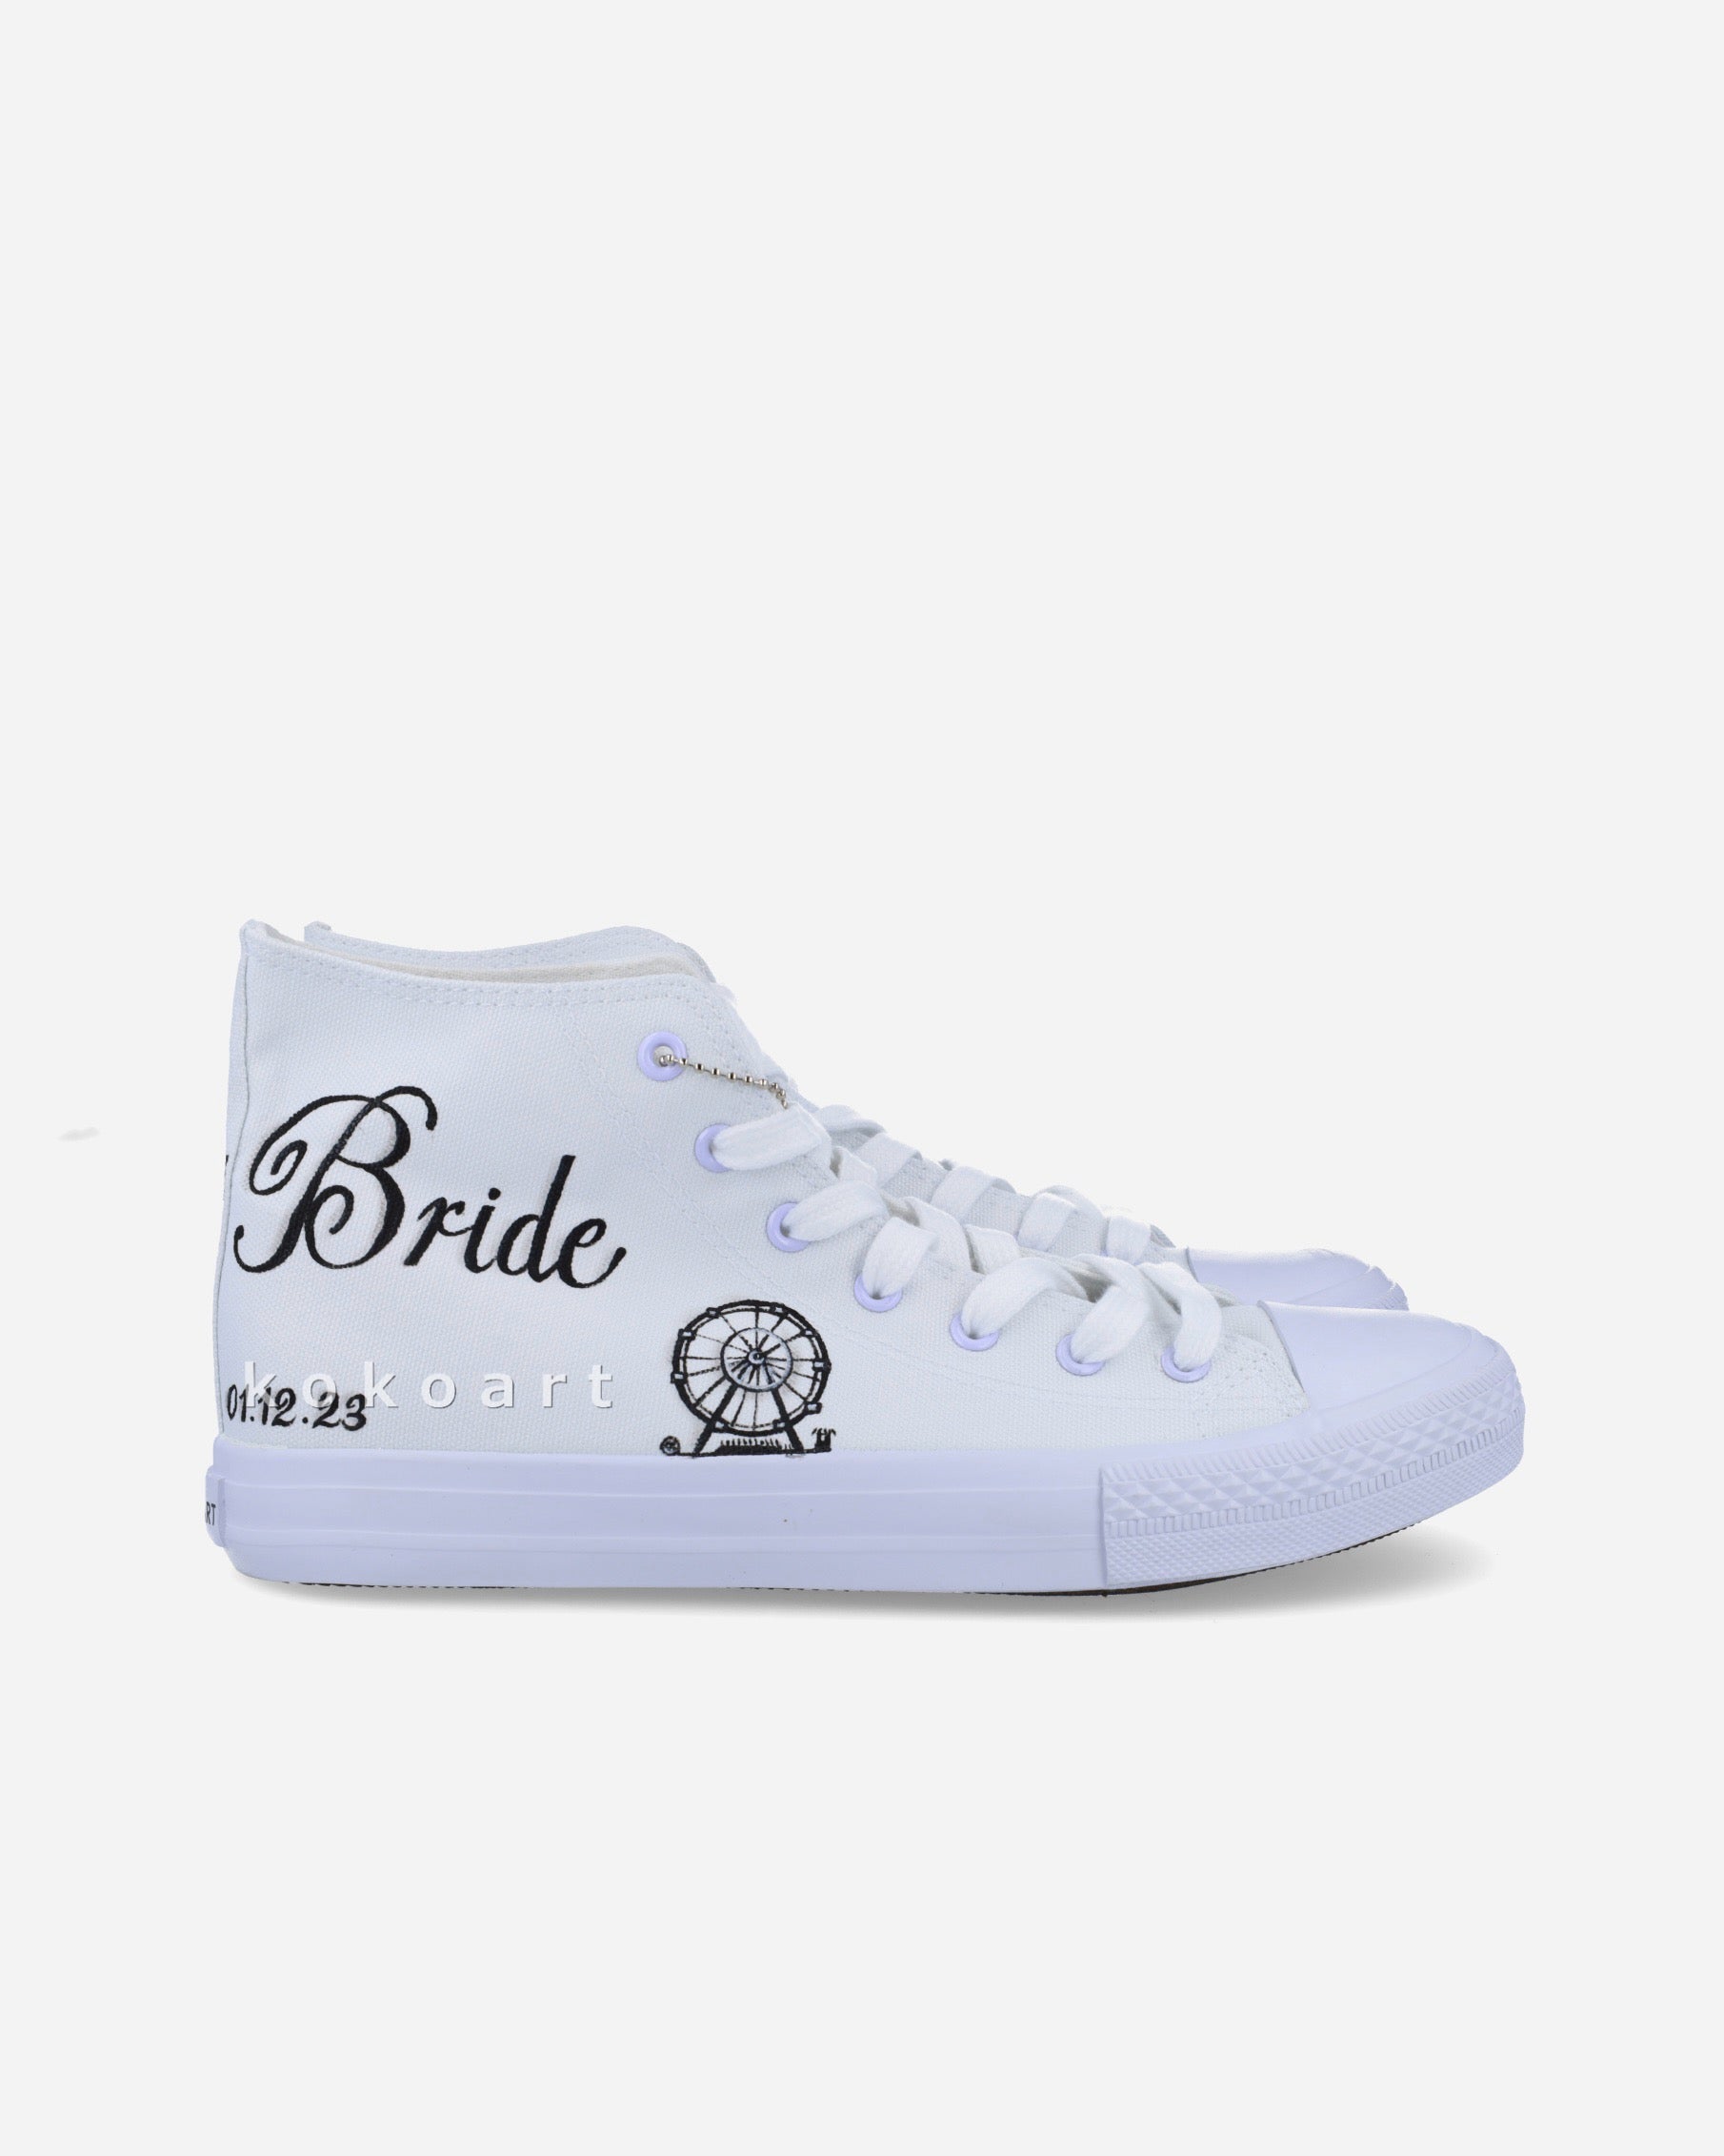 Customisable Bride / Groom Hand Painted Wedding Shoes